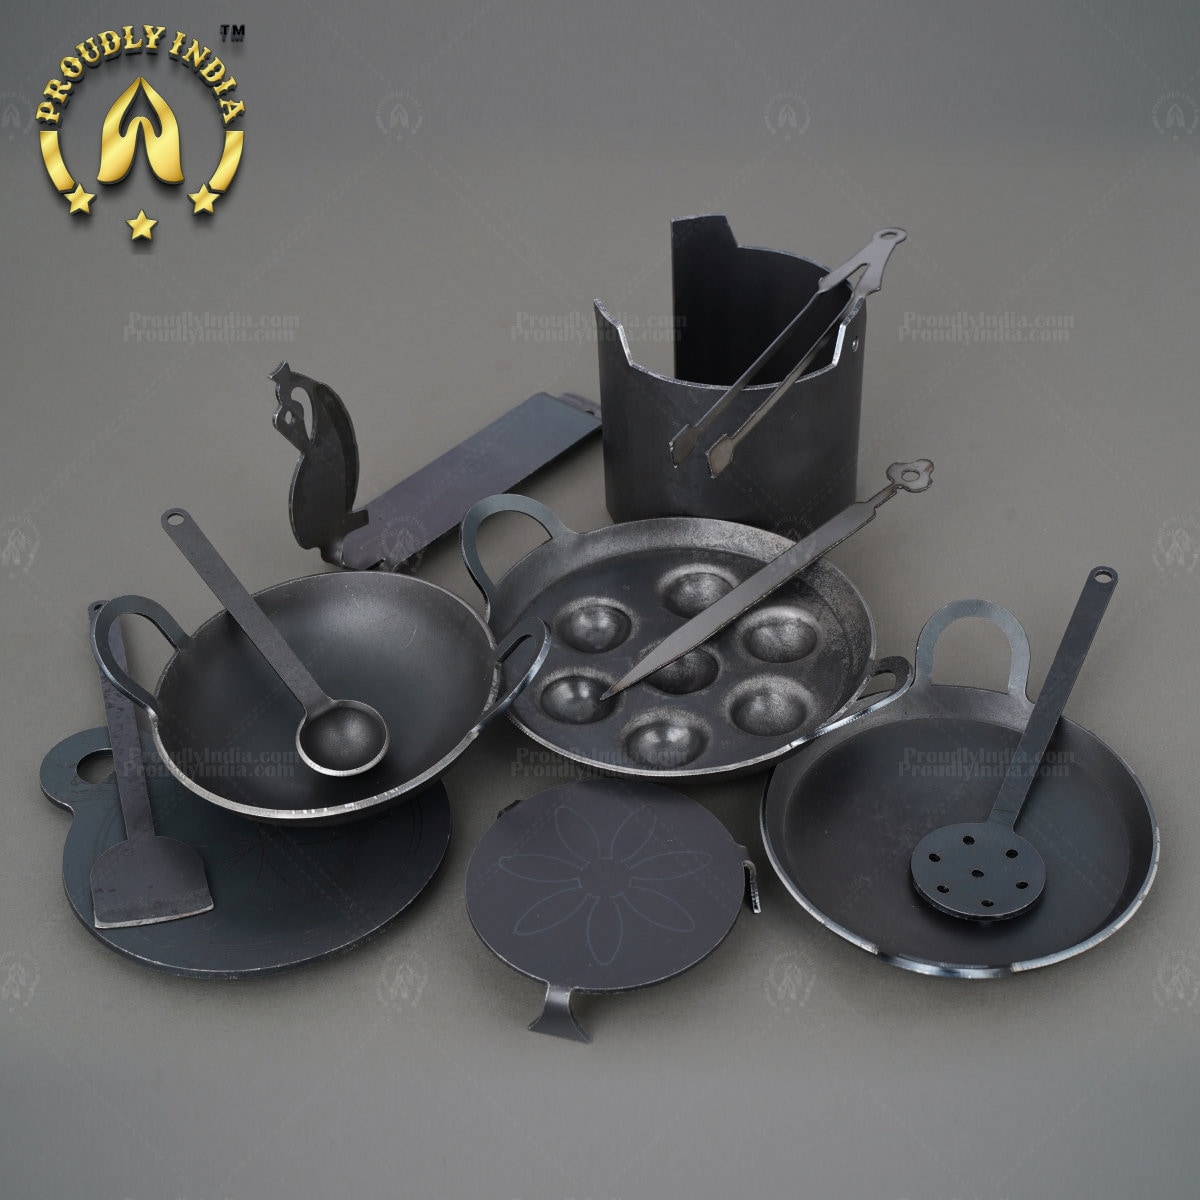 Real Mini Cooking Kitchen Set Real Cooking Stove Knife Wok Cookware Utensils  